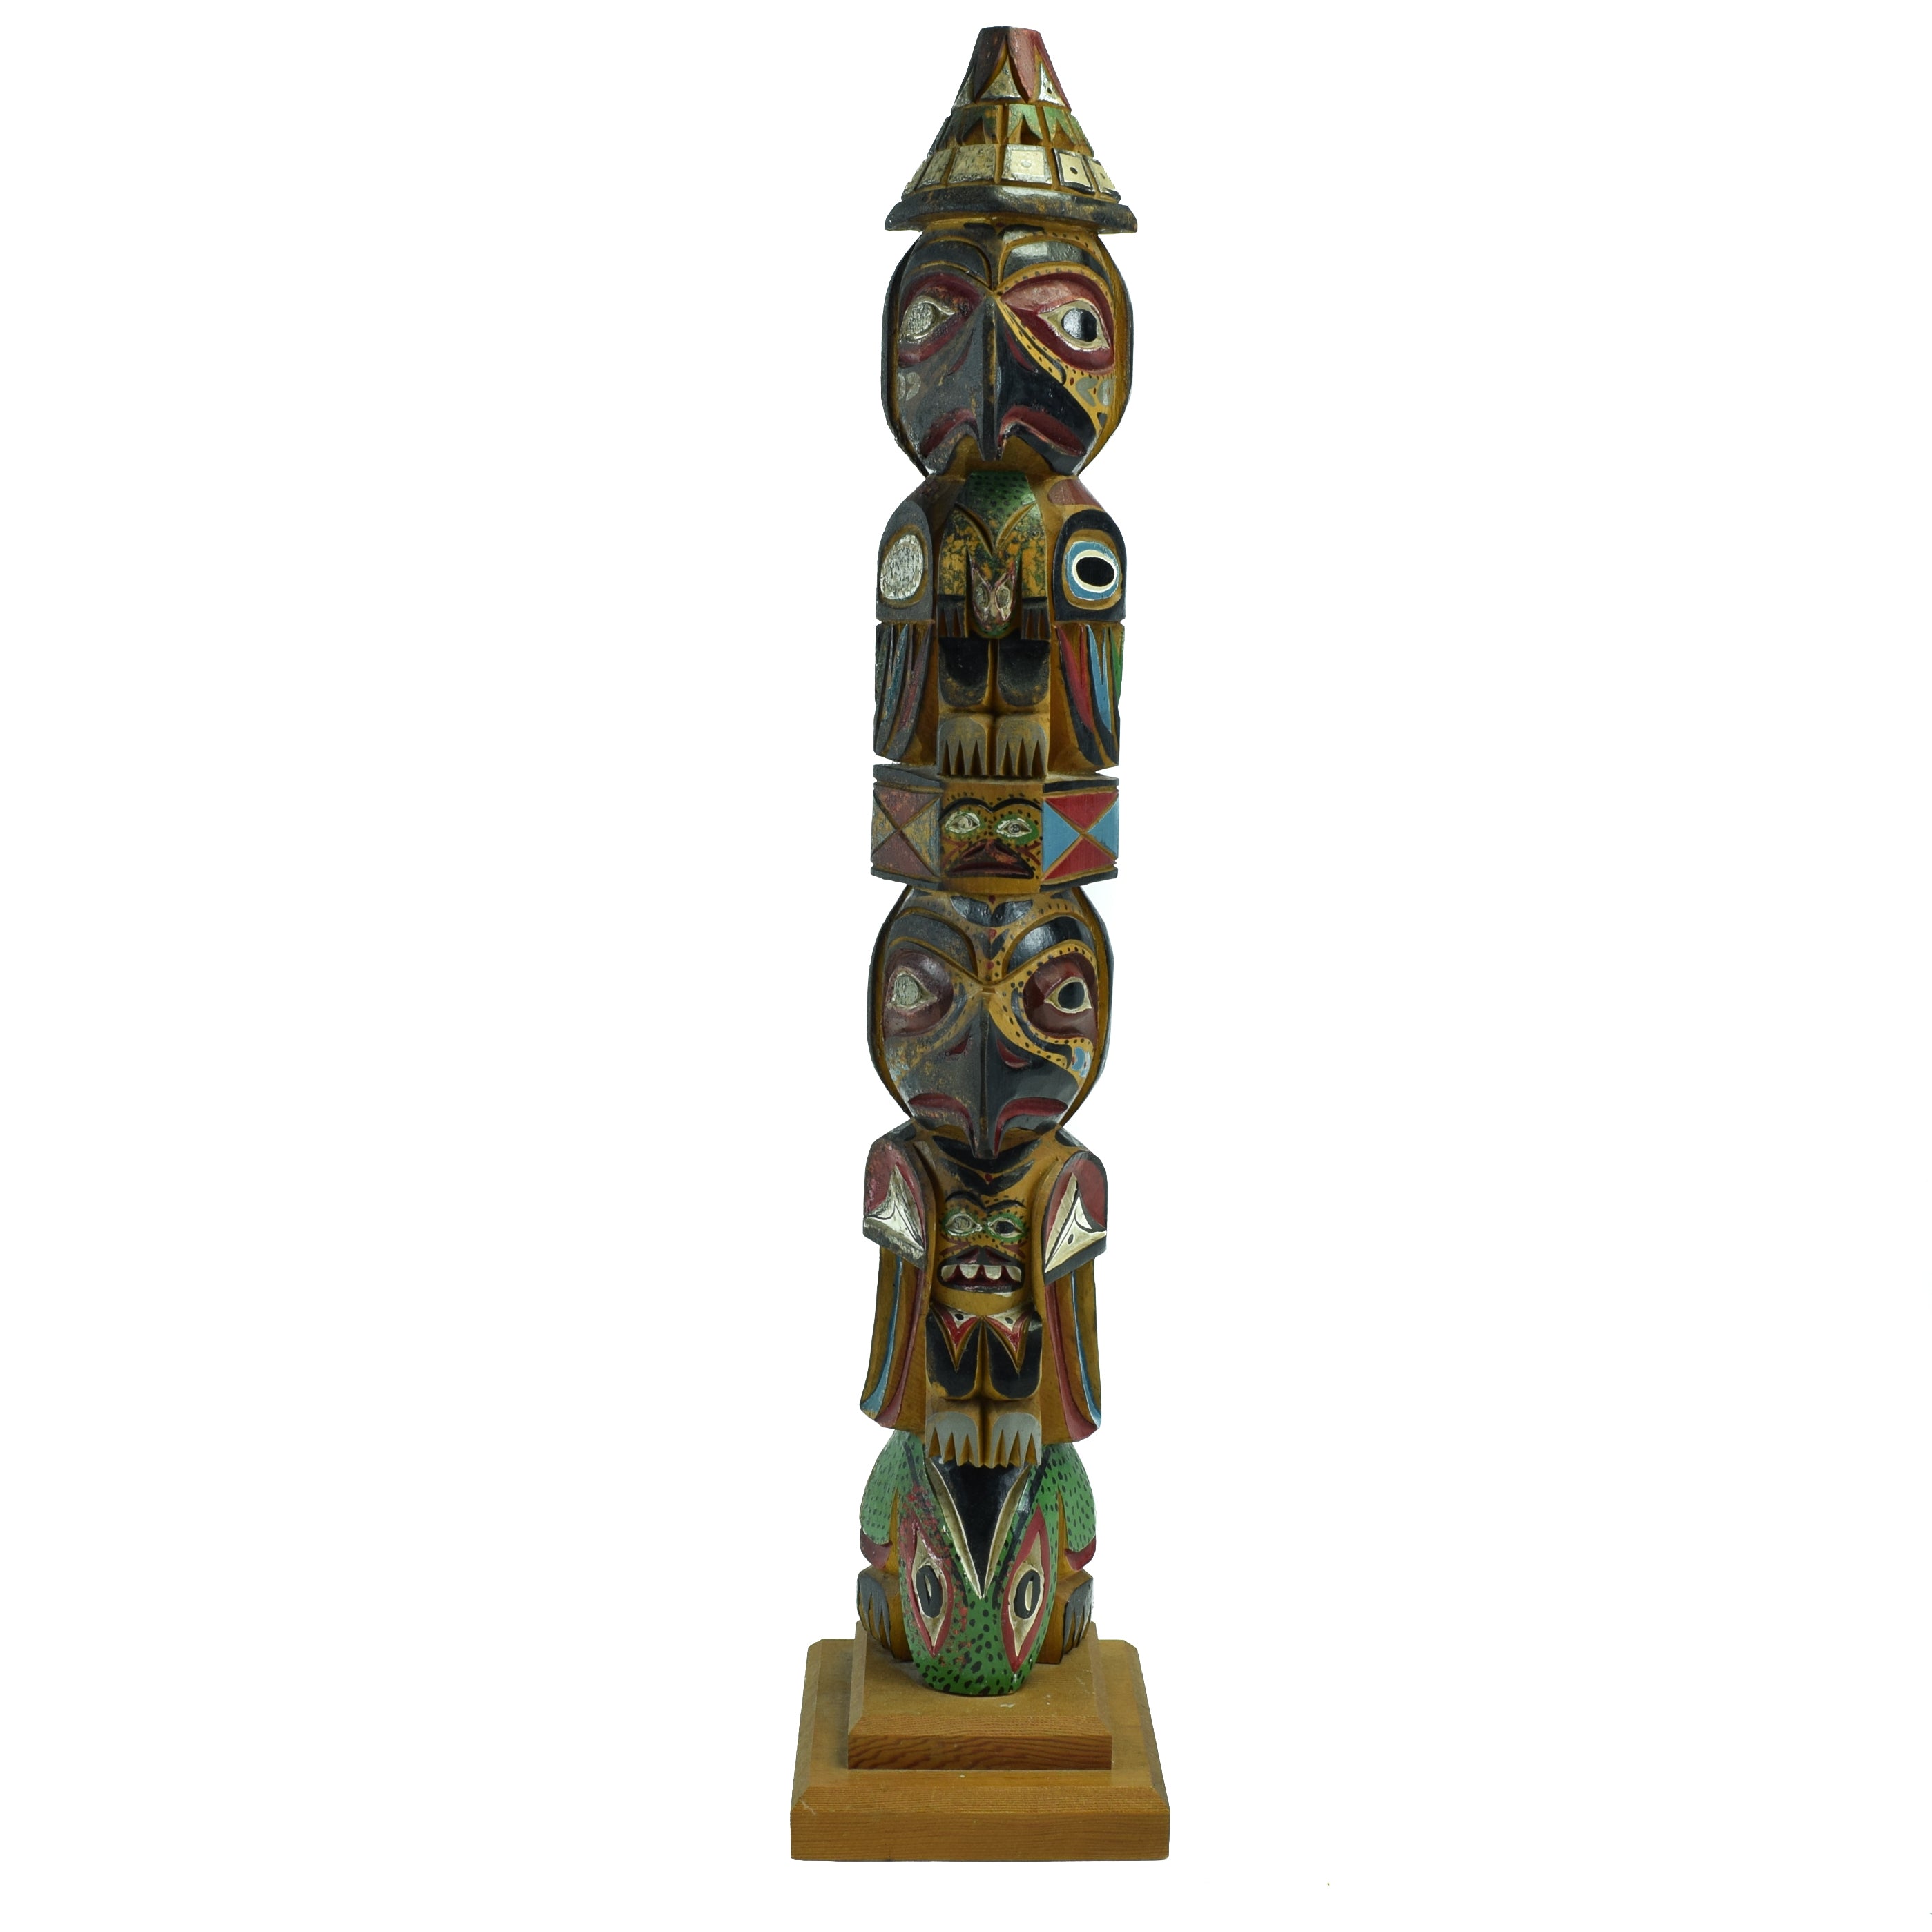 Ditidaht/Nuu-chah-nulth Totem by Raymond Williams, Native, Carving, Totem Pole